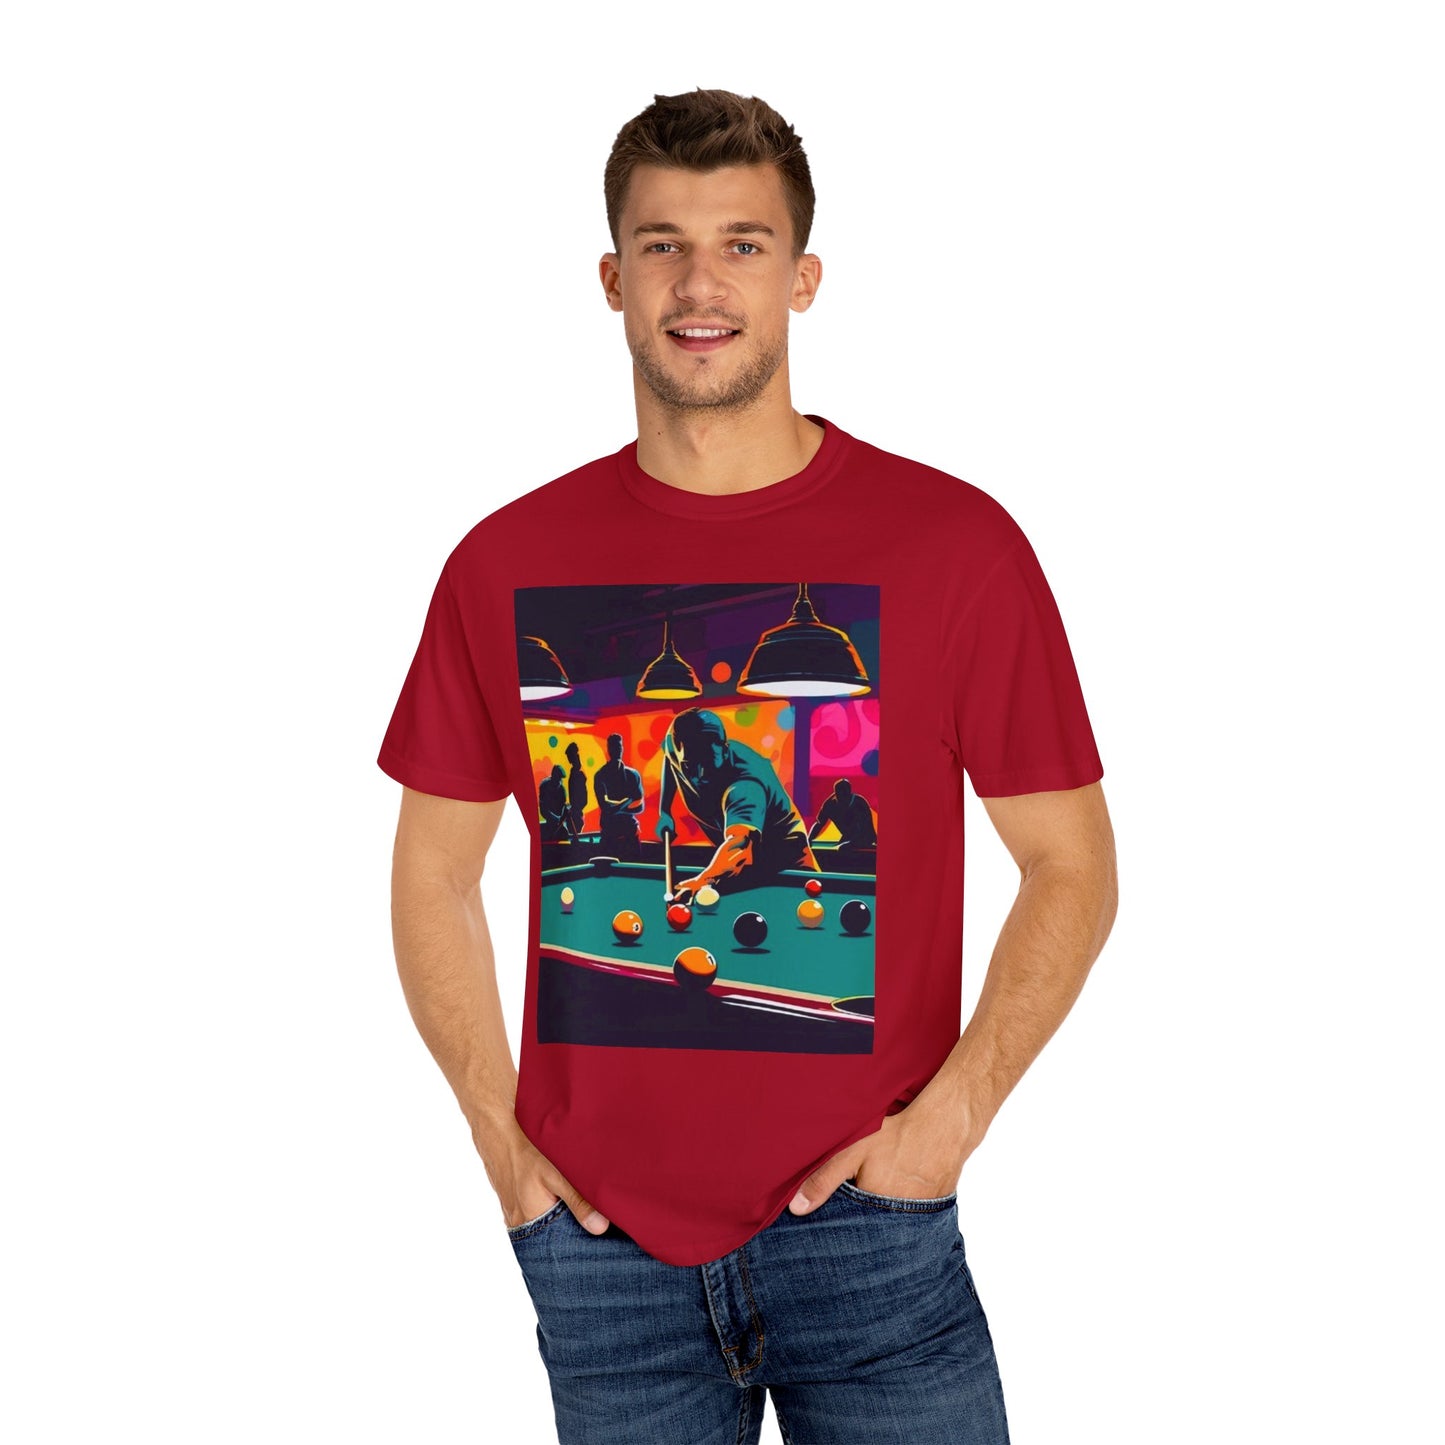 From Break to Victory Lap – Mastering the Table! Pool T-Shirt